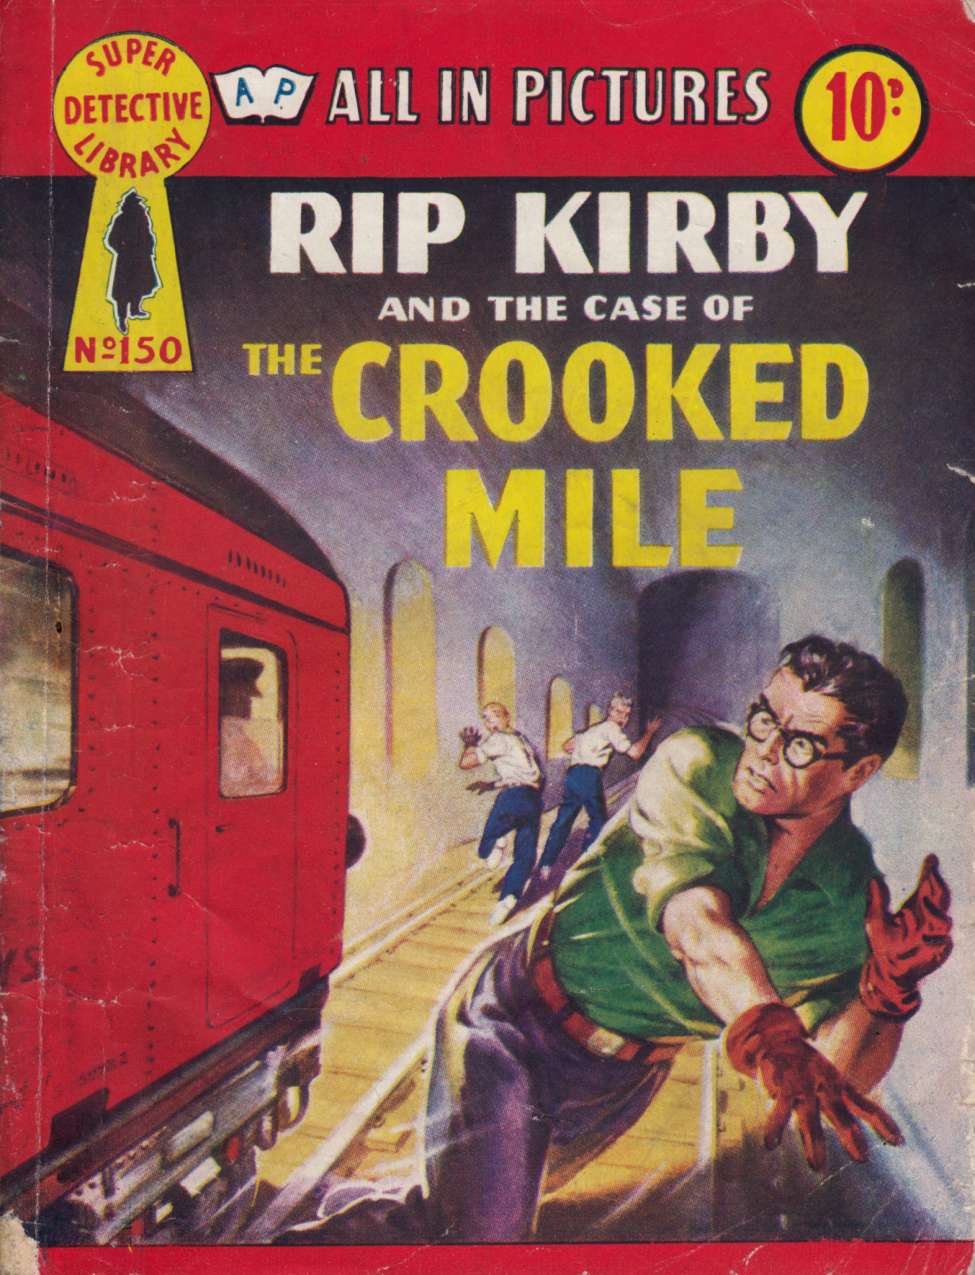 Book Cover For Super Detective Library 150 - Rip Kirby-Case of The Crooked Mile